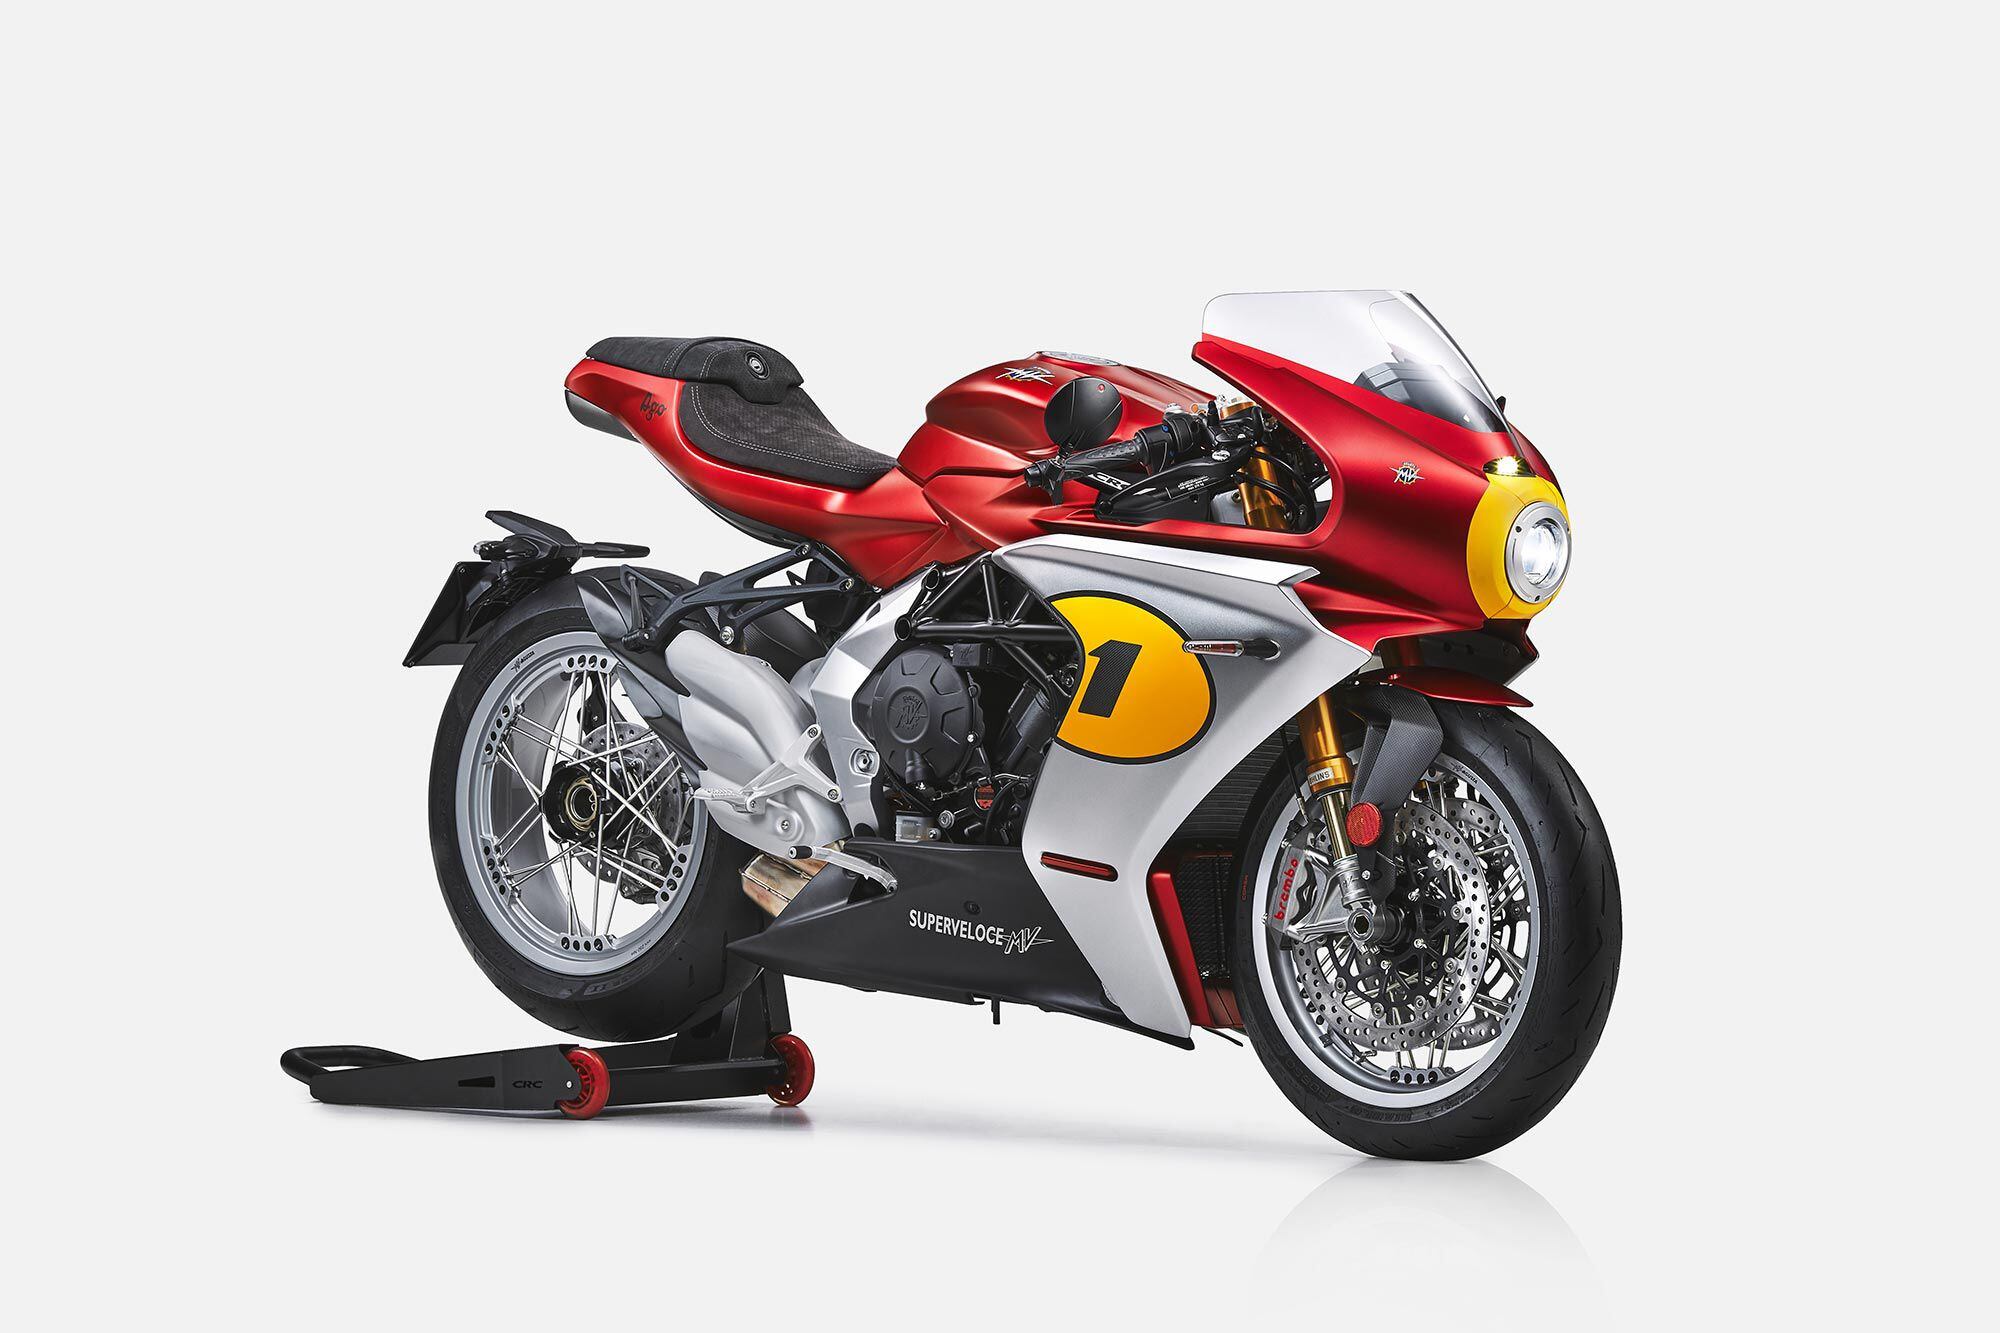 Red and silver? Three cylinders? Must be an MV Agusta! The latest Superveloce Ago is a grand celebration of MV’s glory years in racing with Giacomo Agostini at the helm.